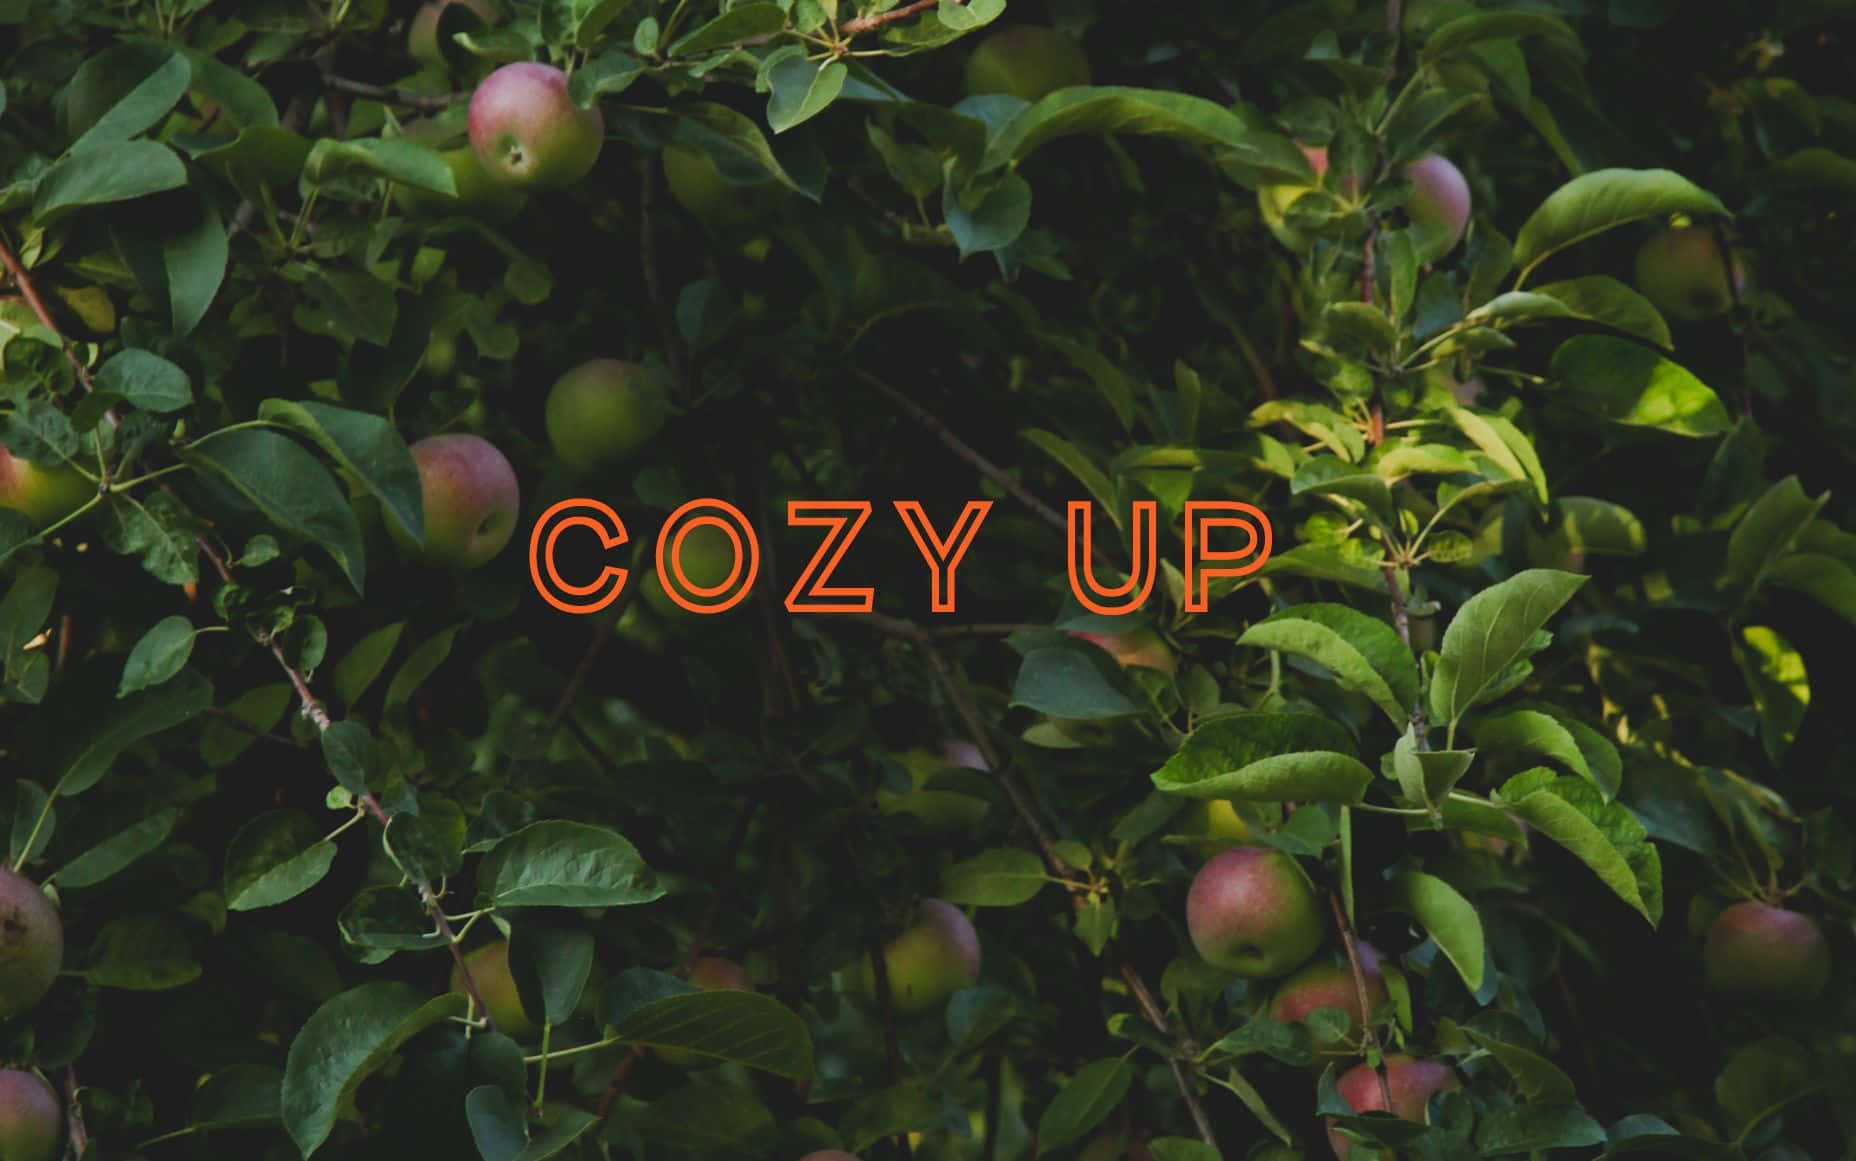 Cozy Up - A Tree With Apples Background